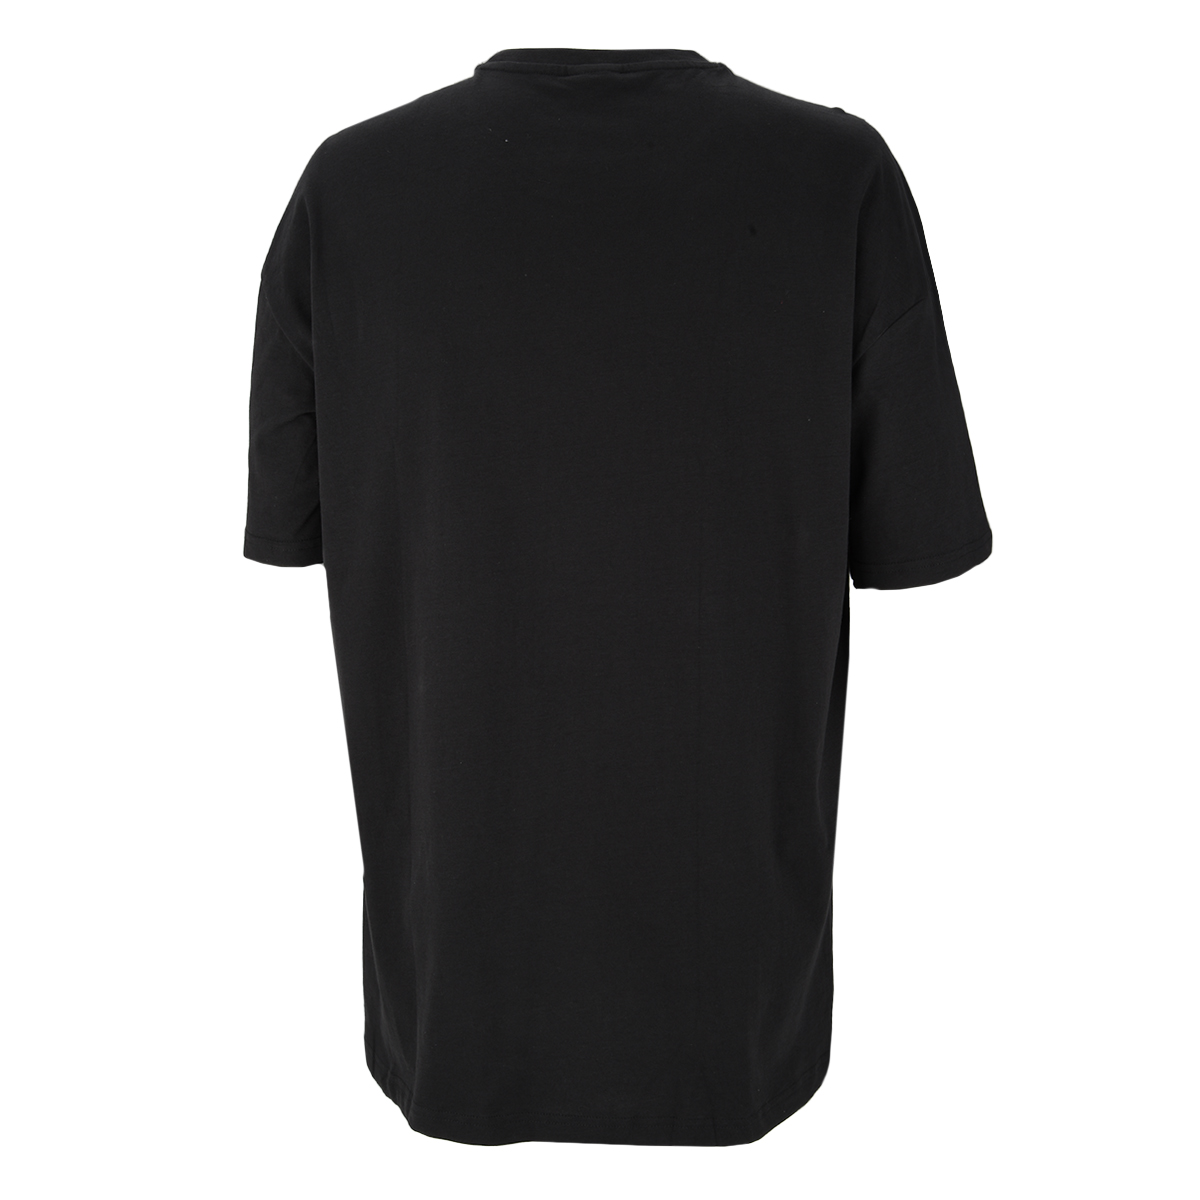 Remera Puma Classics Oversized Hombre,  image number null